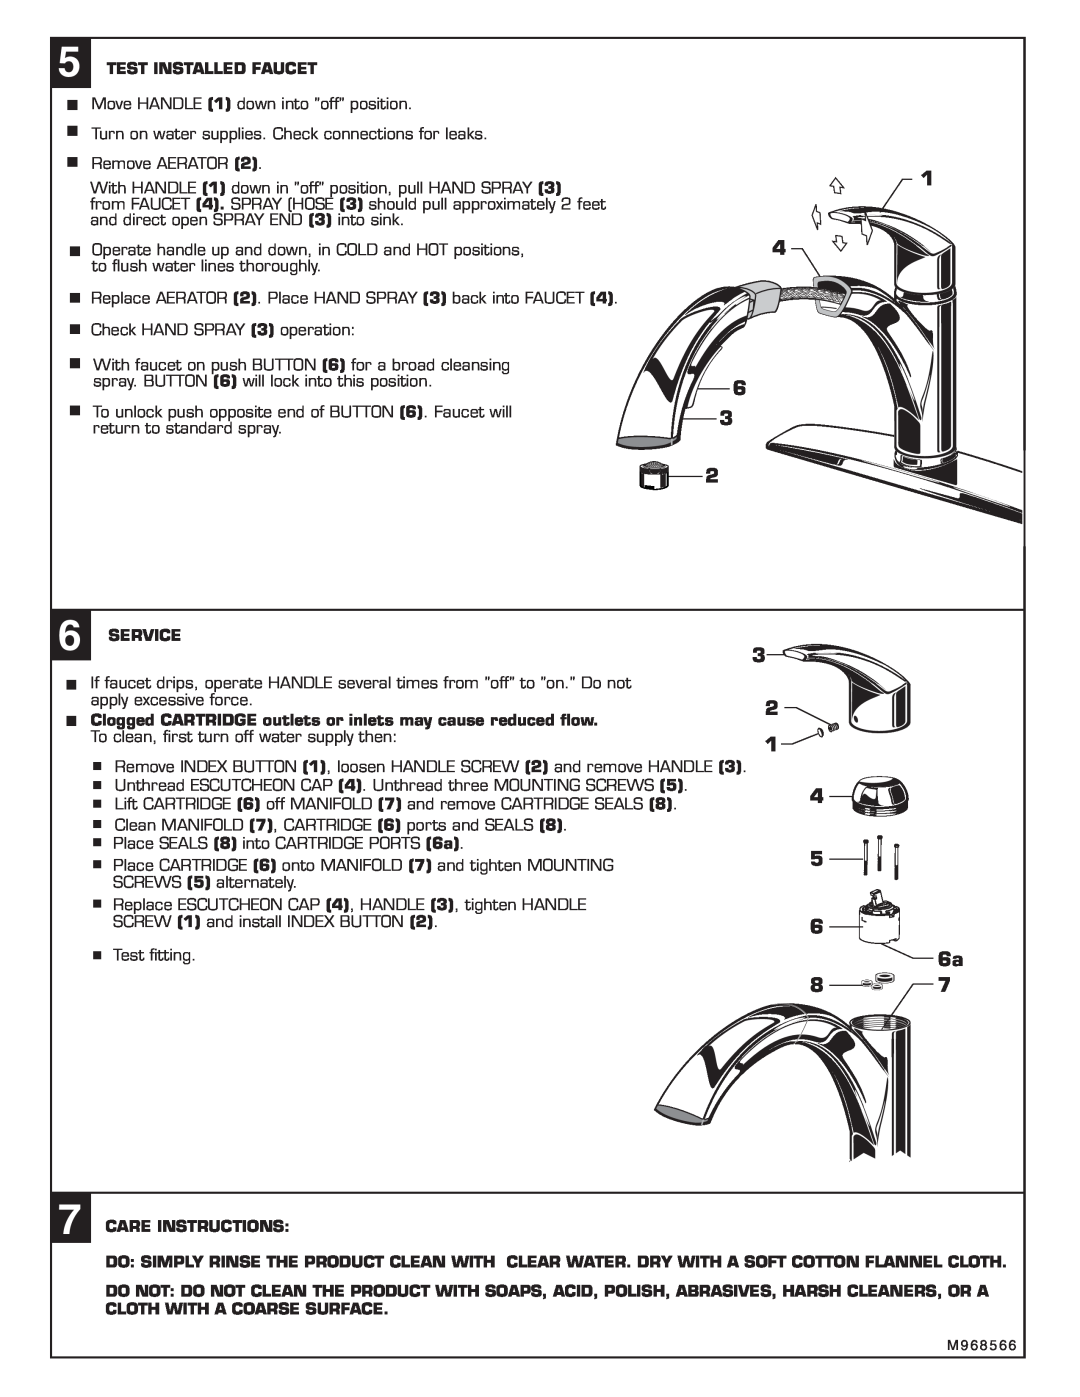 American Standard 4101.100, M968566 installation instructions Test Installed Faucet, Service, Care Instructions, 4 5 6 6a 